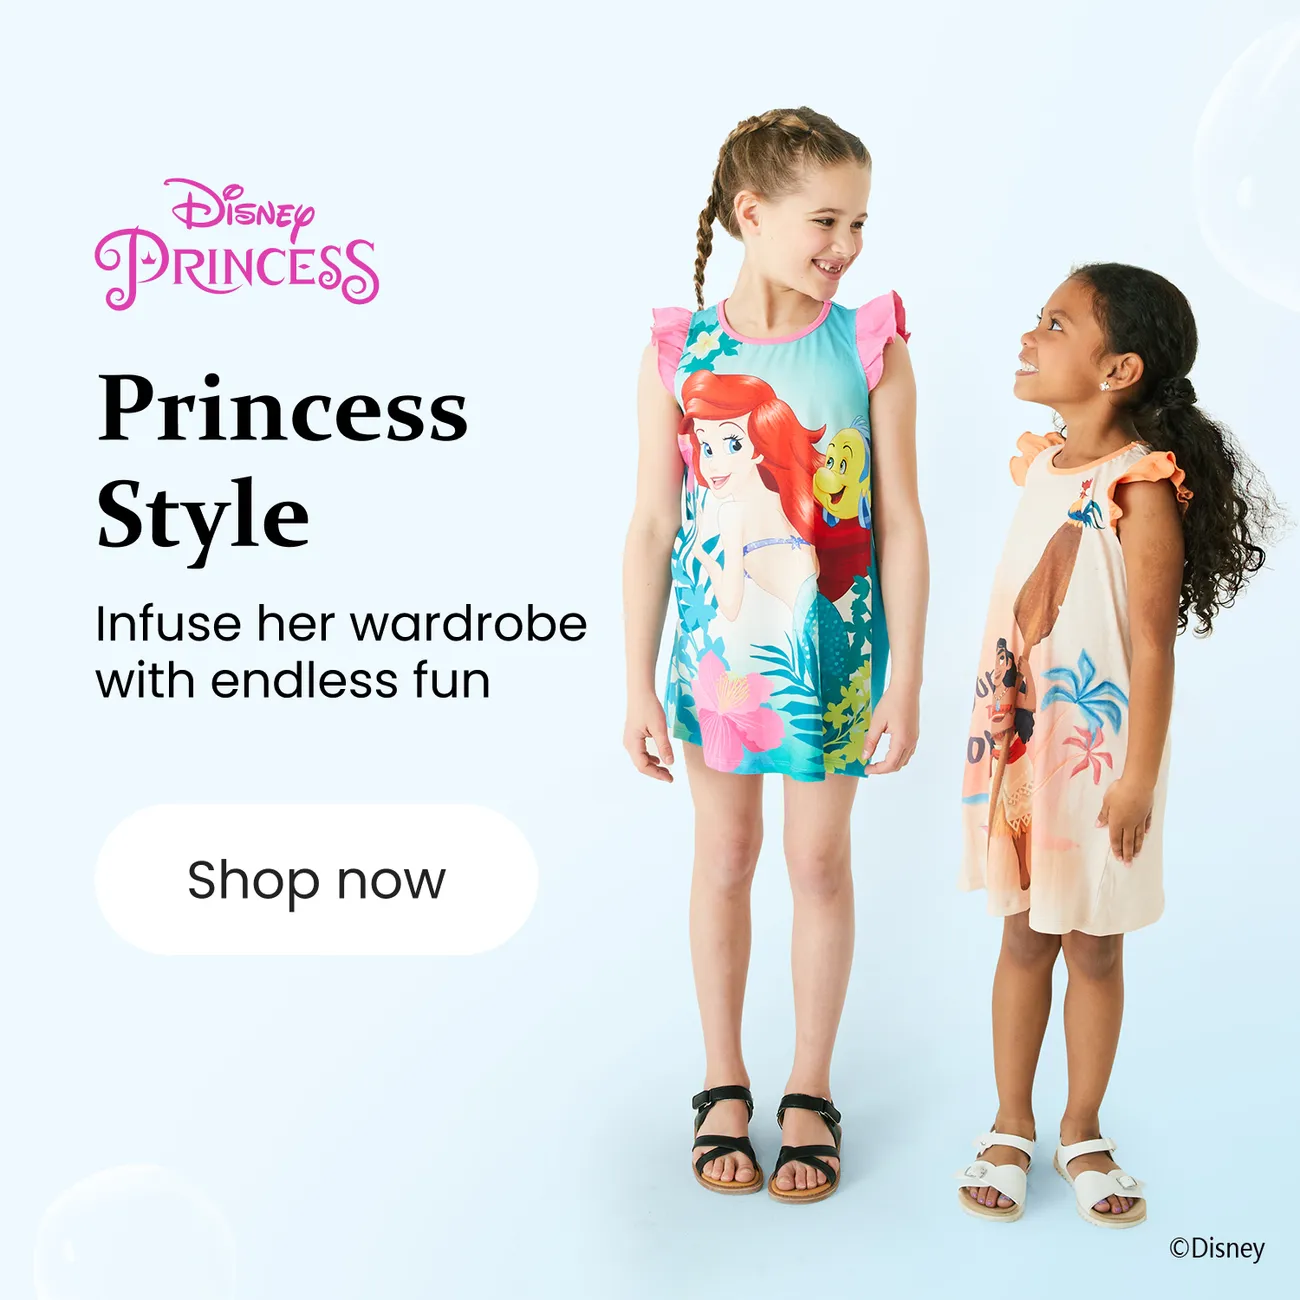 Click it to join Princess Style activity